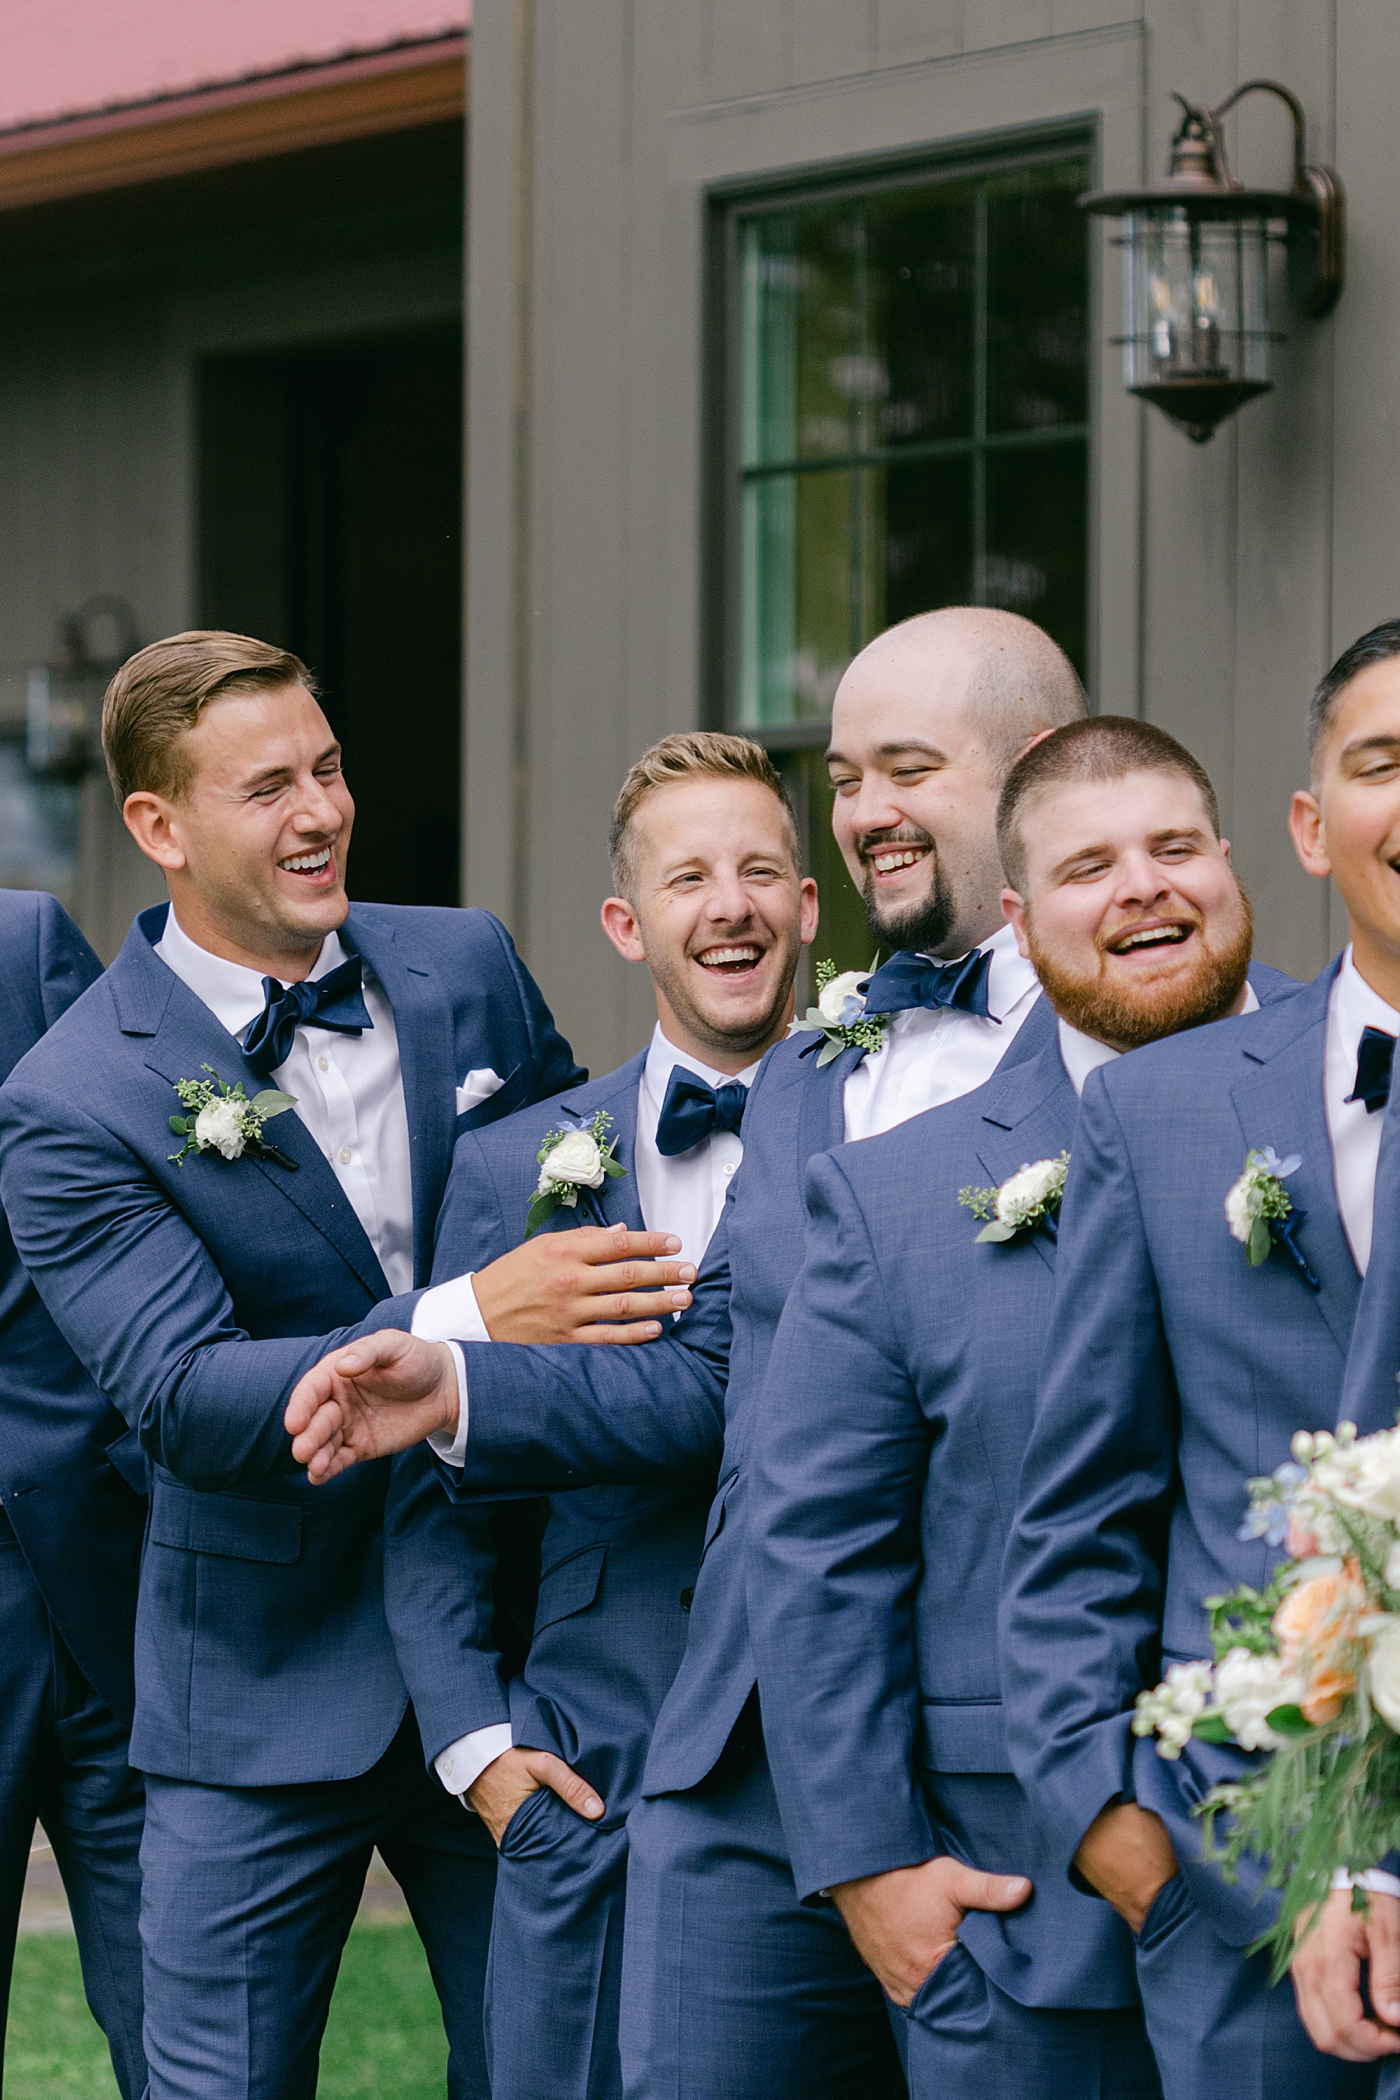 Groomsmen laughing together | Image by Hudson Valley Wedding Photographer Hope Helmuth